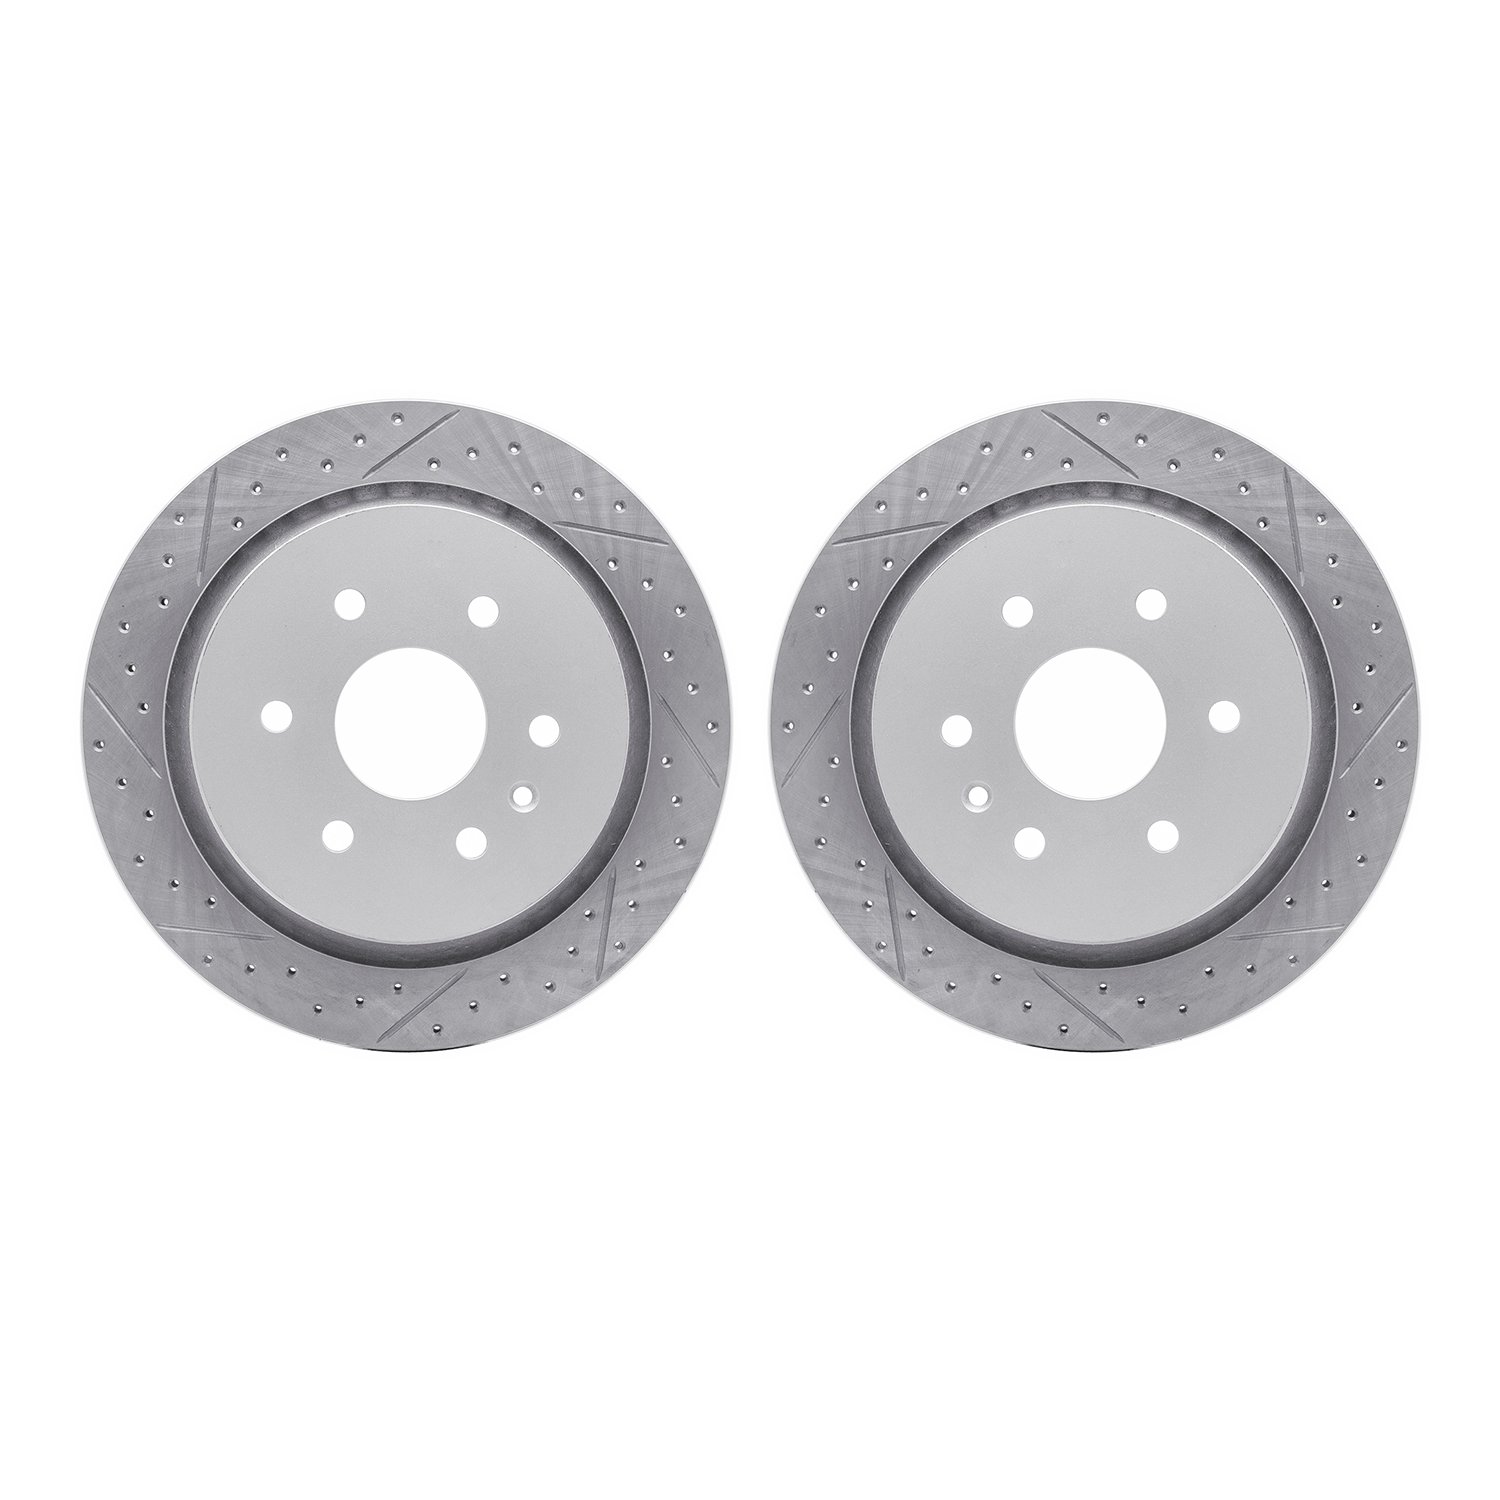 2002-46037 Geoperformance Drilled/Slotted Brake Rotors, 2013-2019 GM, Position: Rear